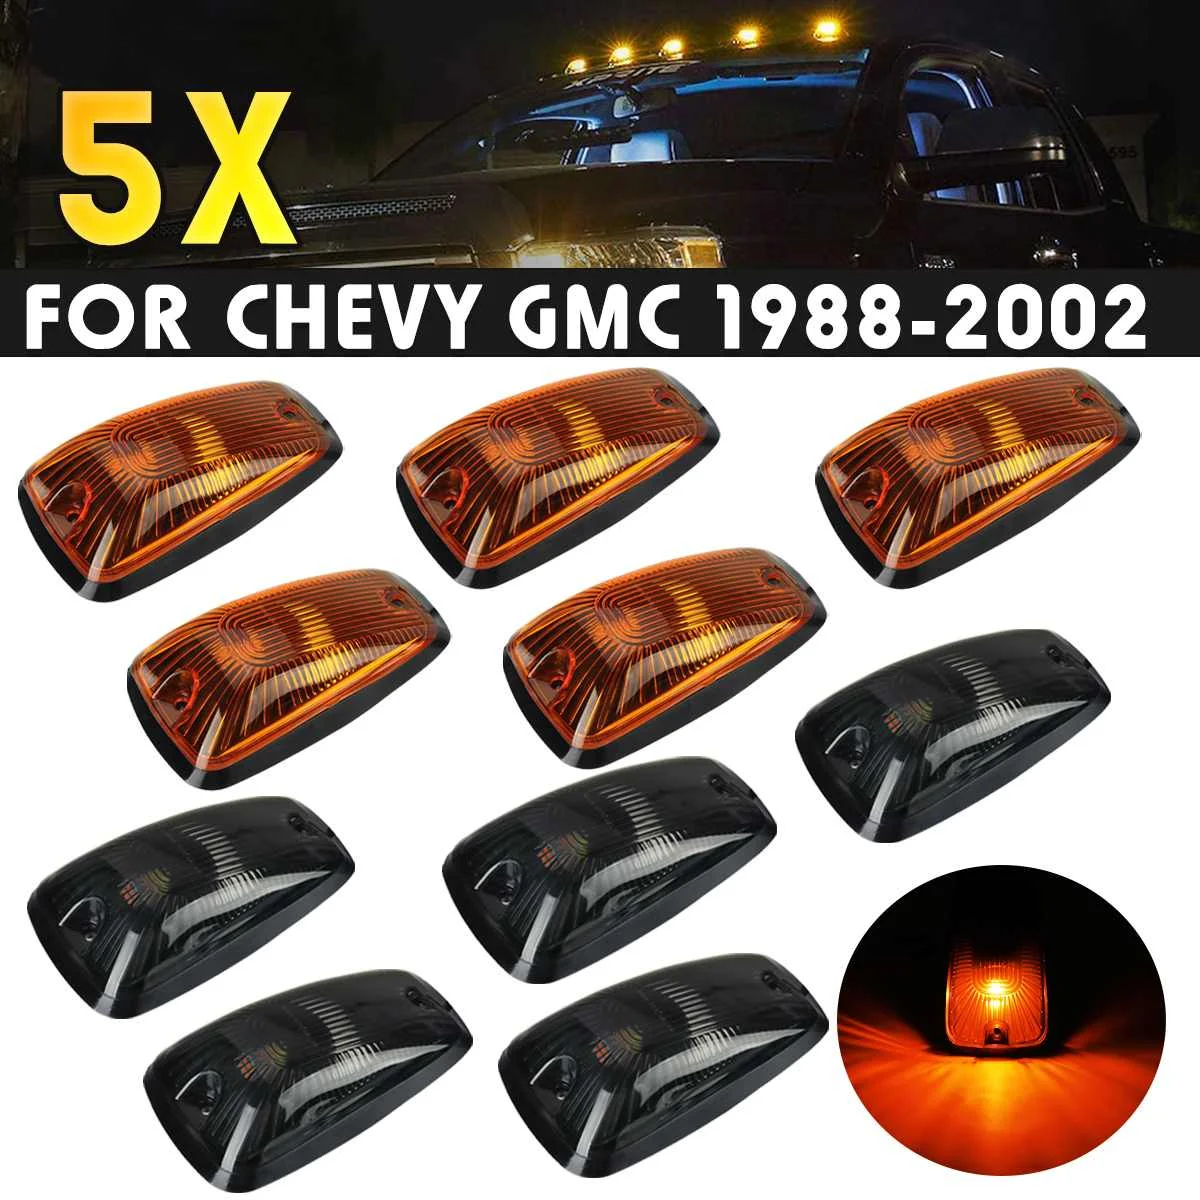 5PCS Car Cab Roof Top Marker Light T10 10 SMD Amber Bulb Base Cab Roof Clearance Marker Lamps For Chevy GMC 1988-2002